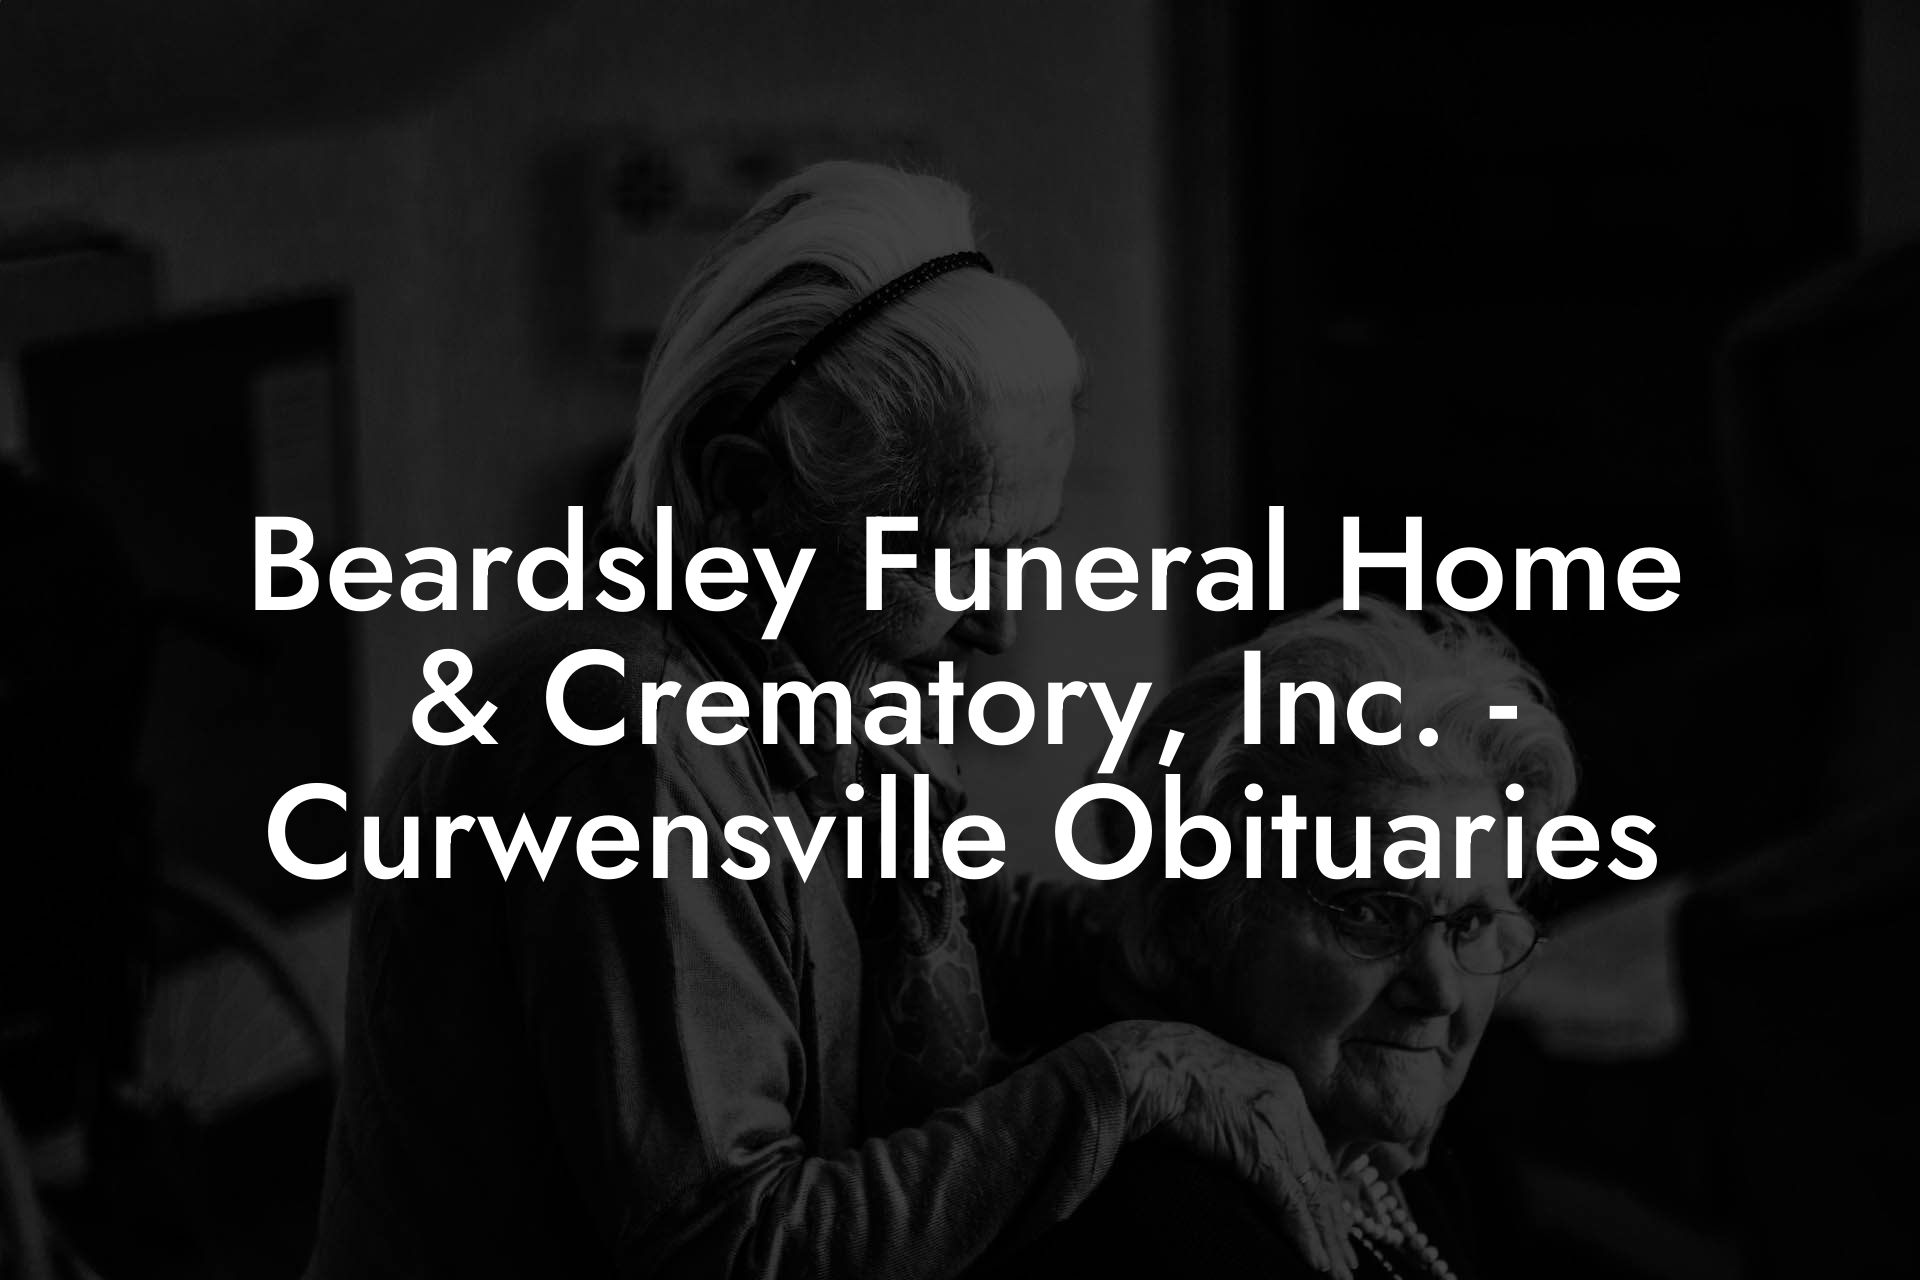 Beardsley Funeral Home & Crematory, Inc. - Curwensville Obituaries